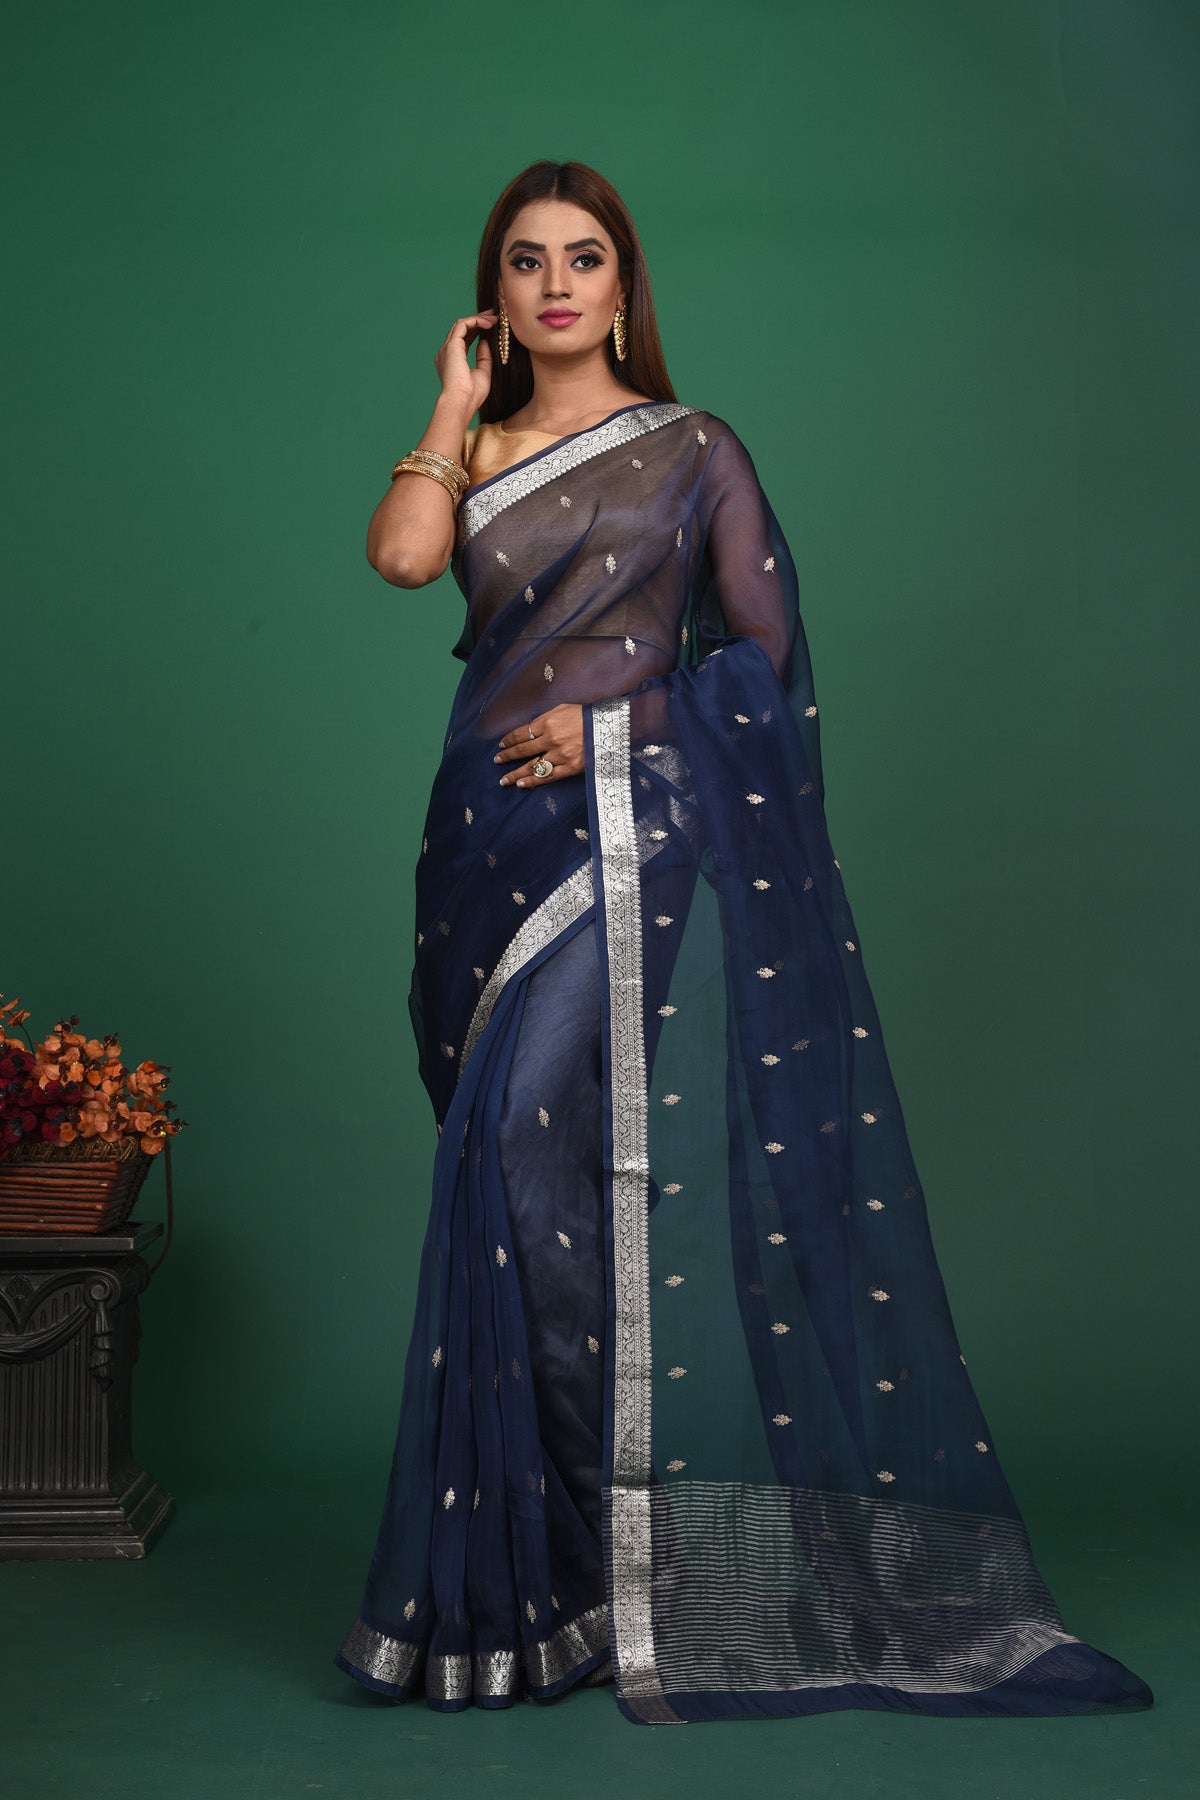 Buy this elegant dark blue soft organza designer saree with silver zari work on heavy border online in USA. Organza silk fabric is a type of silk cloth that is crisp, translucent, and extremely light in weight. It is used to make organza silk saree, drapes, and other decorative pieces. Add this designer sari to your collection from Pure Elegance Indian fashion store in USA.-Full view with open pallu.